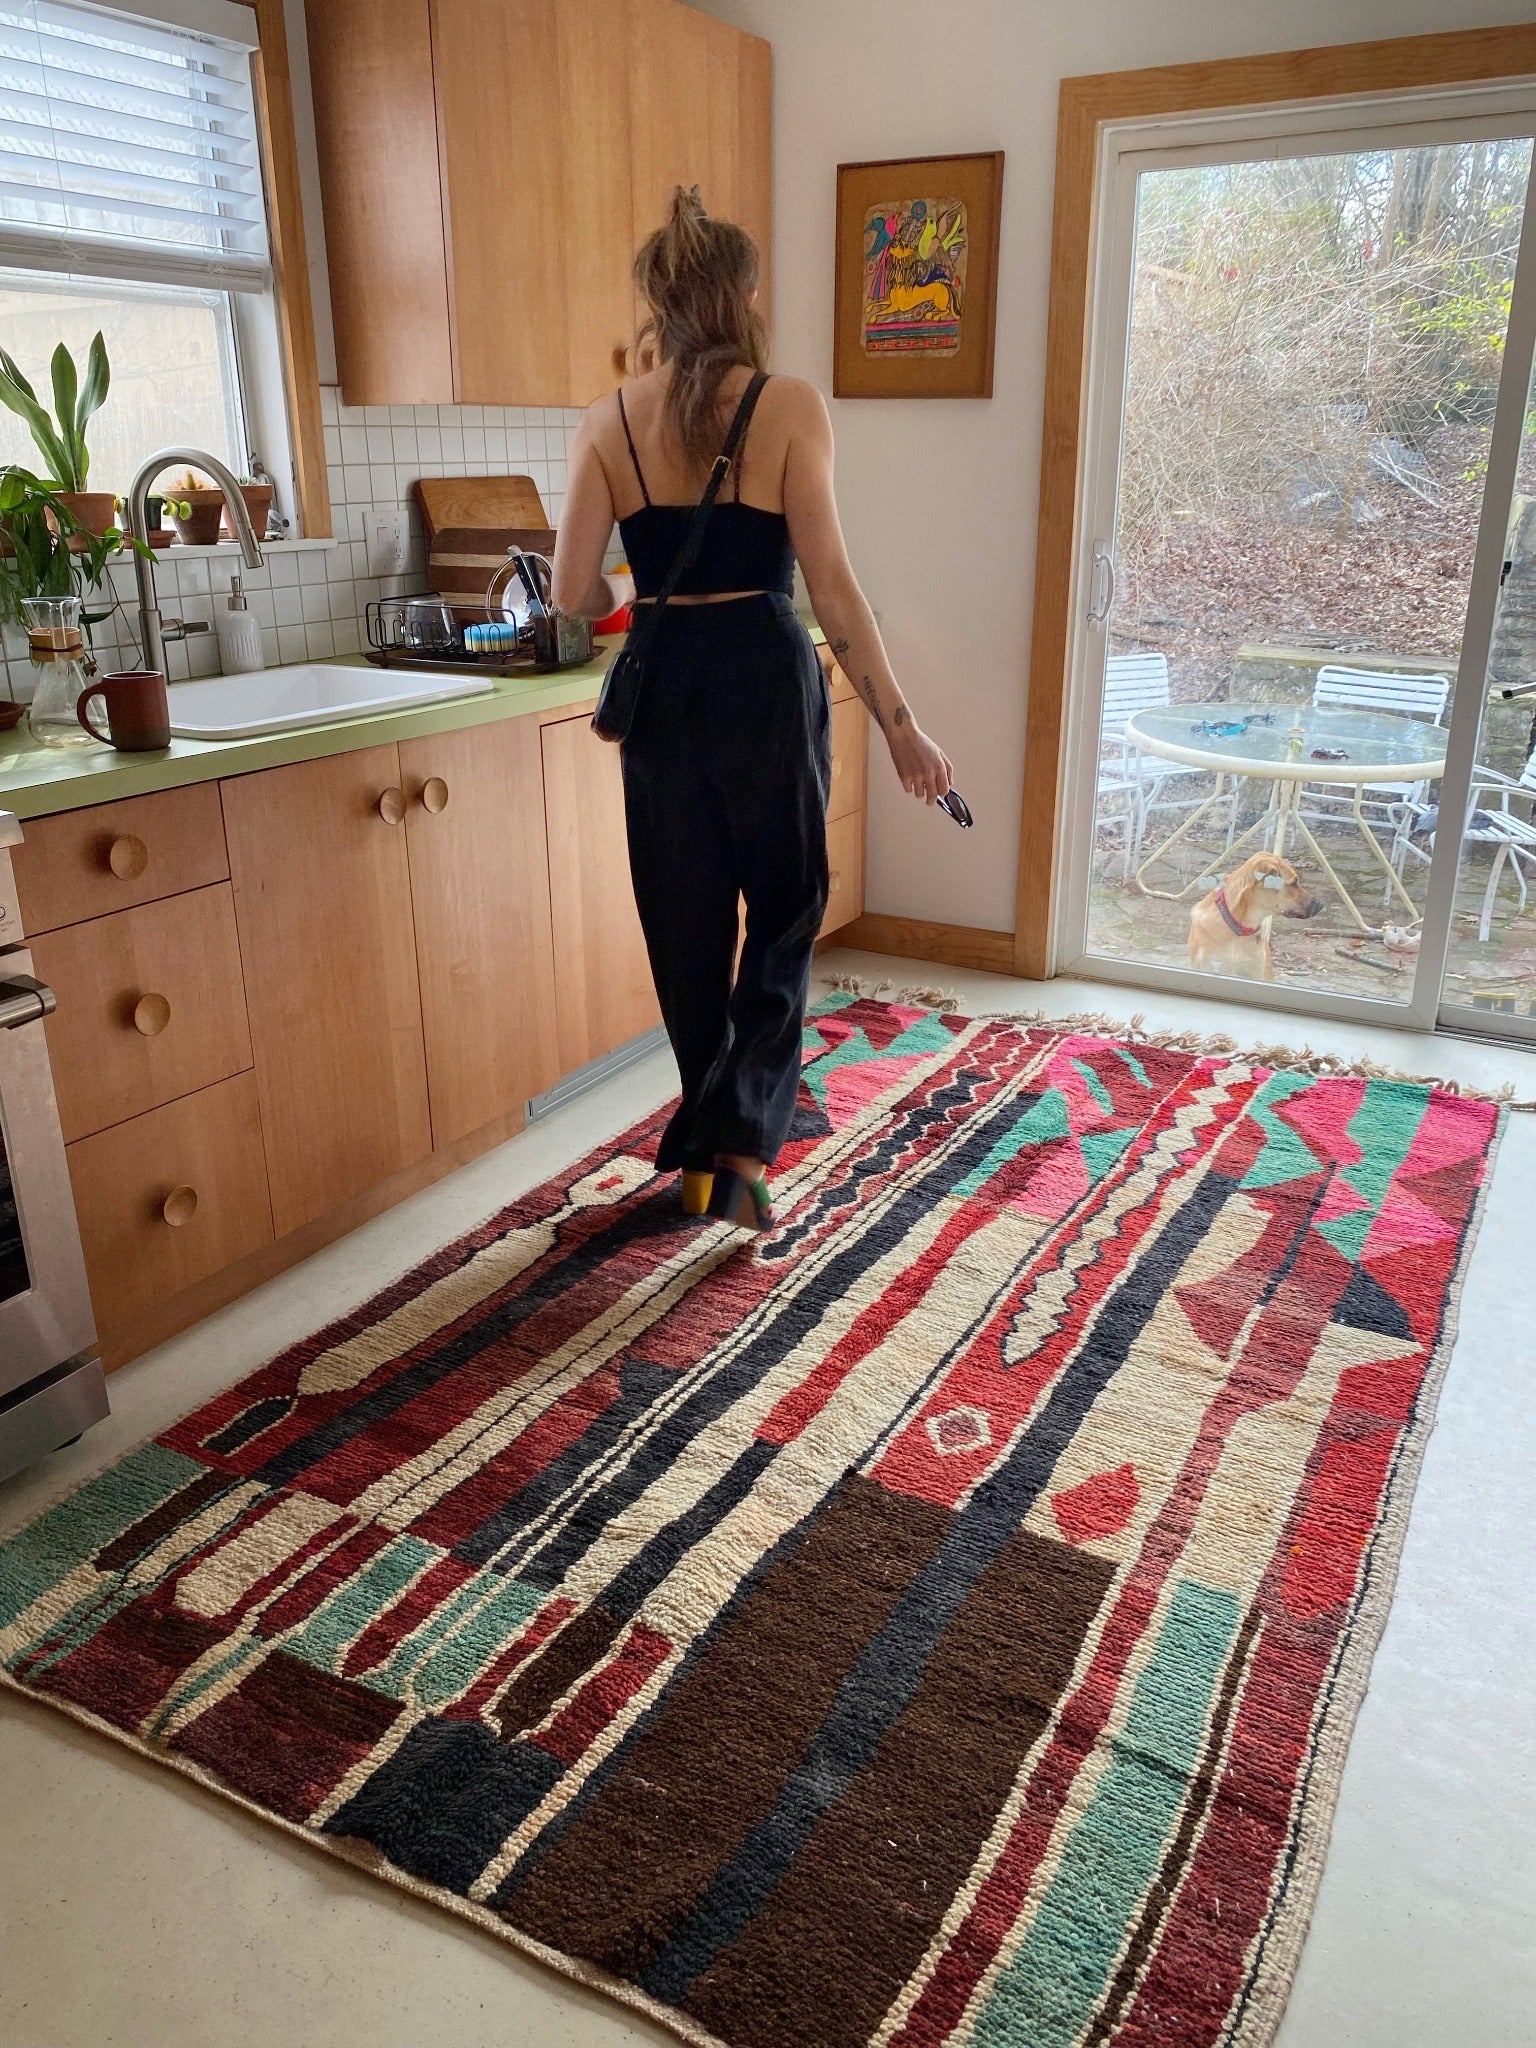 Style Ponderosa Moroccan Rug in a Kitchen